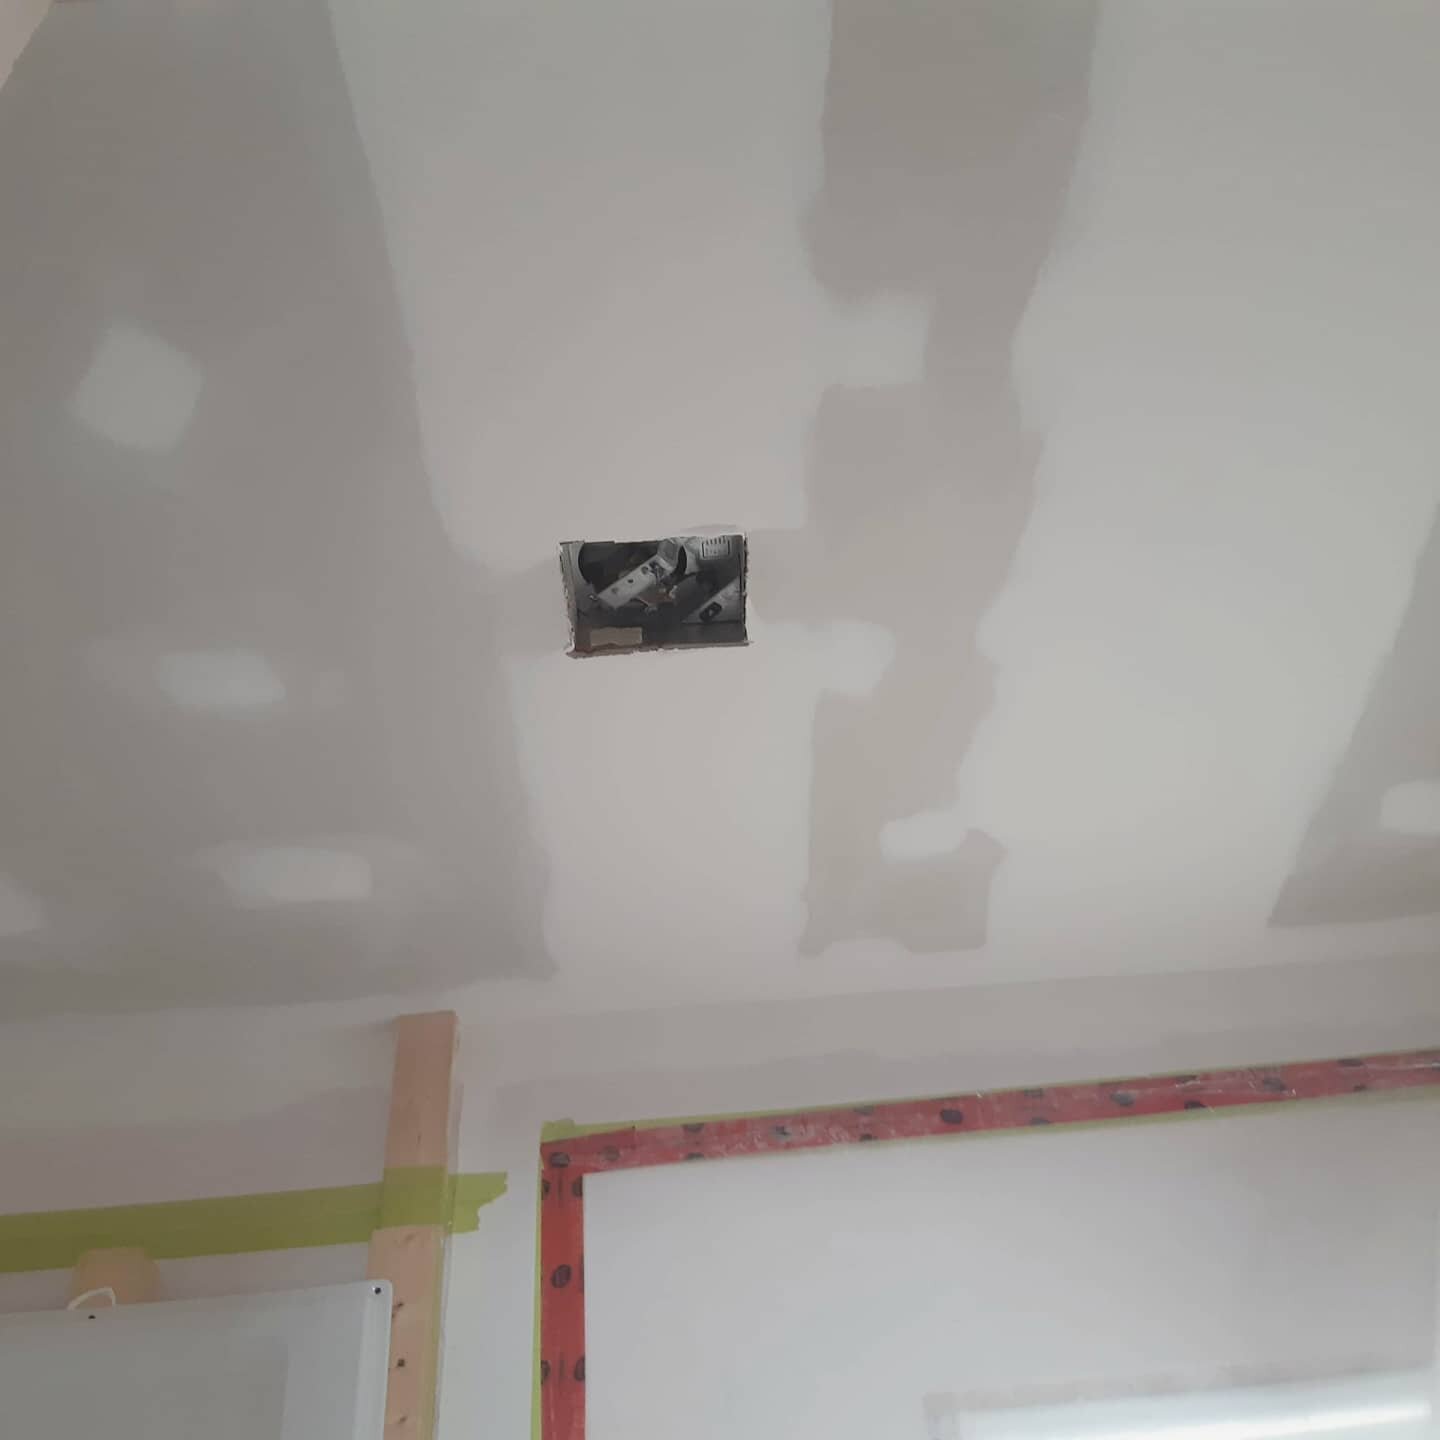 Bathroom ceiling before and after, new drywall and fresh coat of paint. Give us a call today 705-690-0558 or visit us at elitepaint.ca for your bathroom renos!